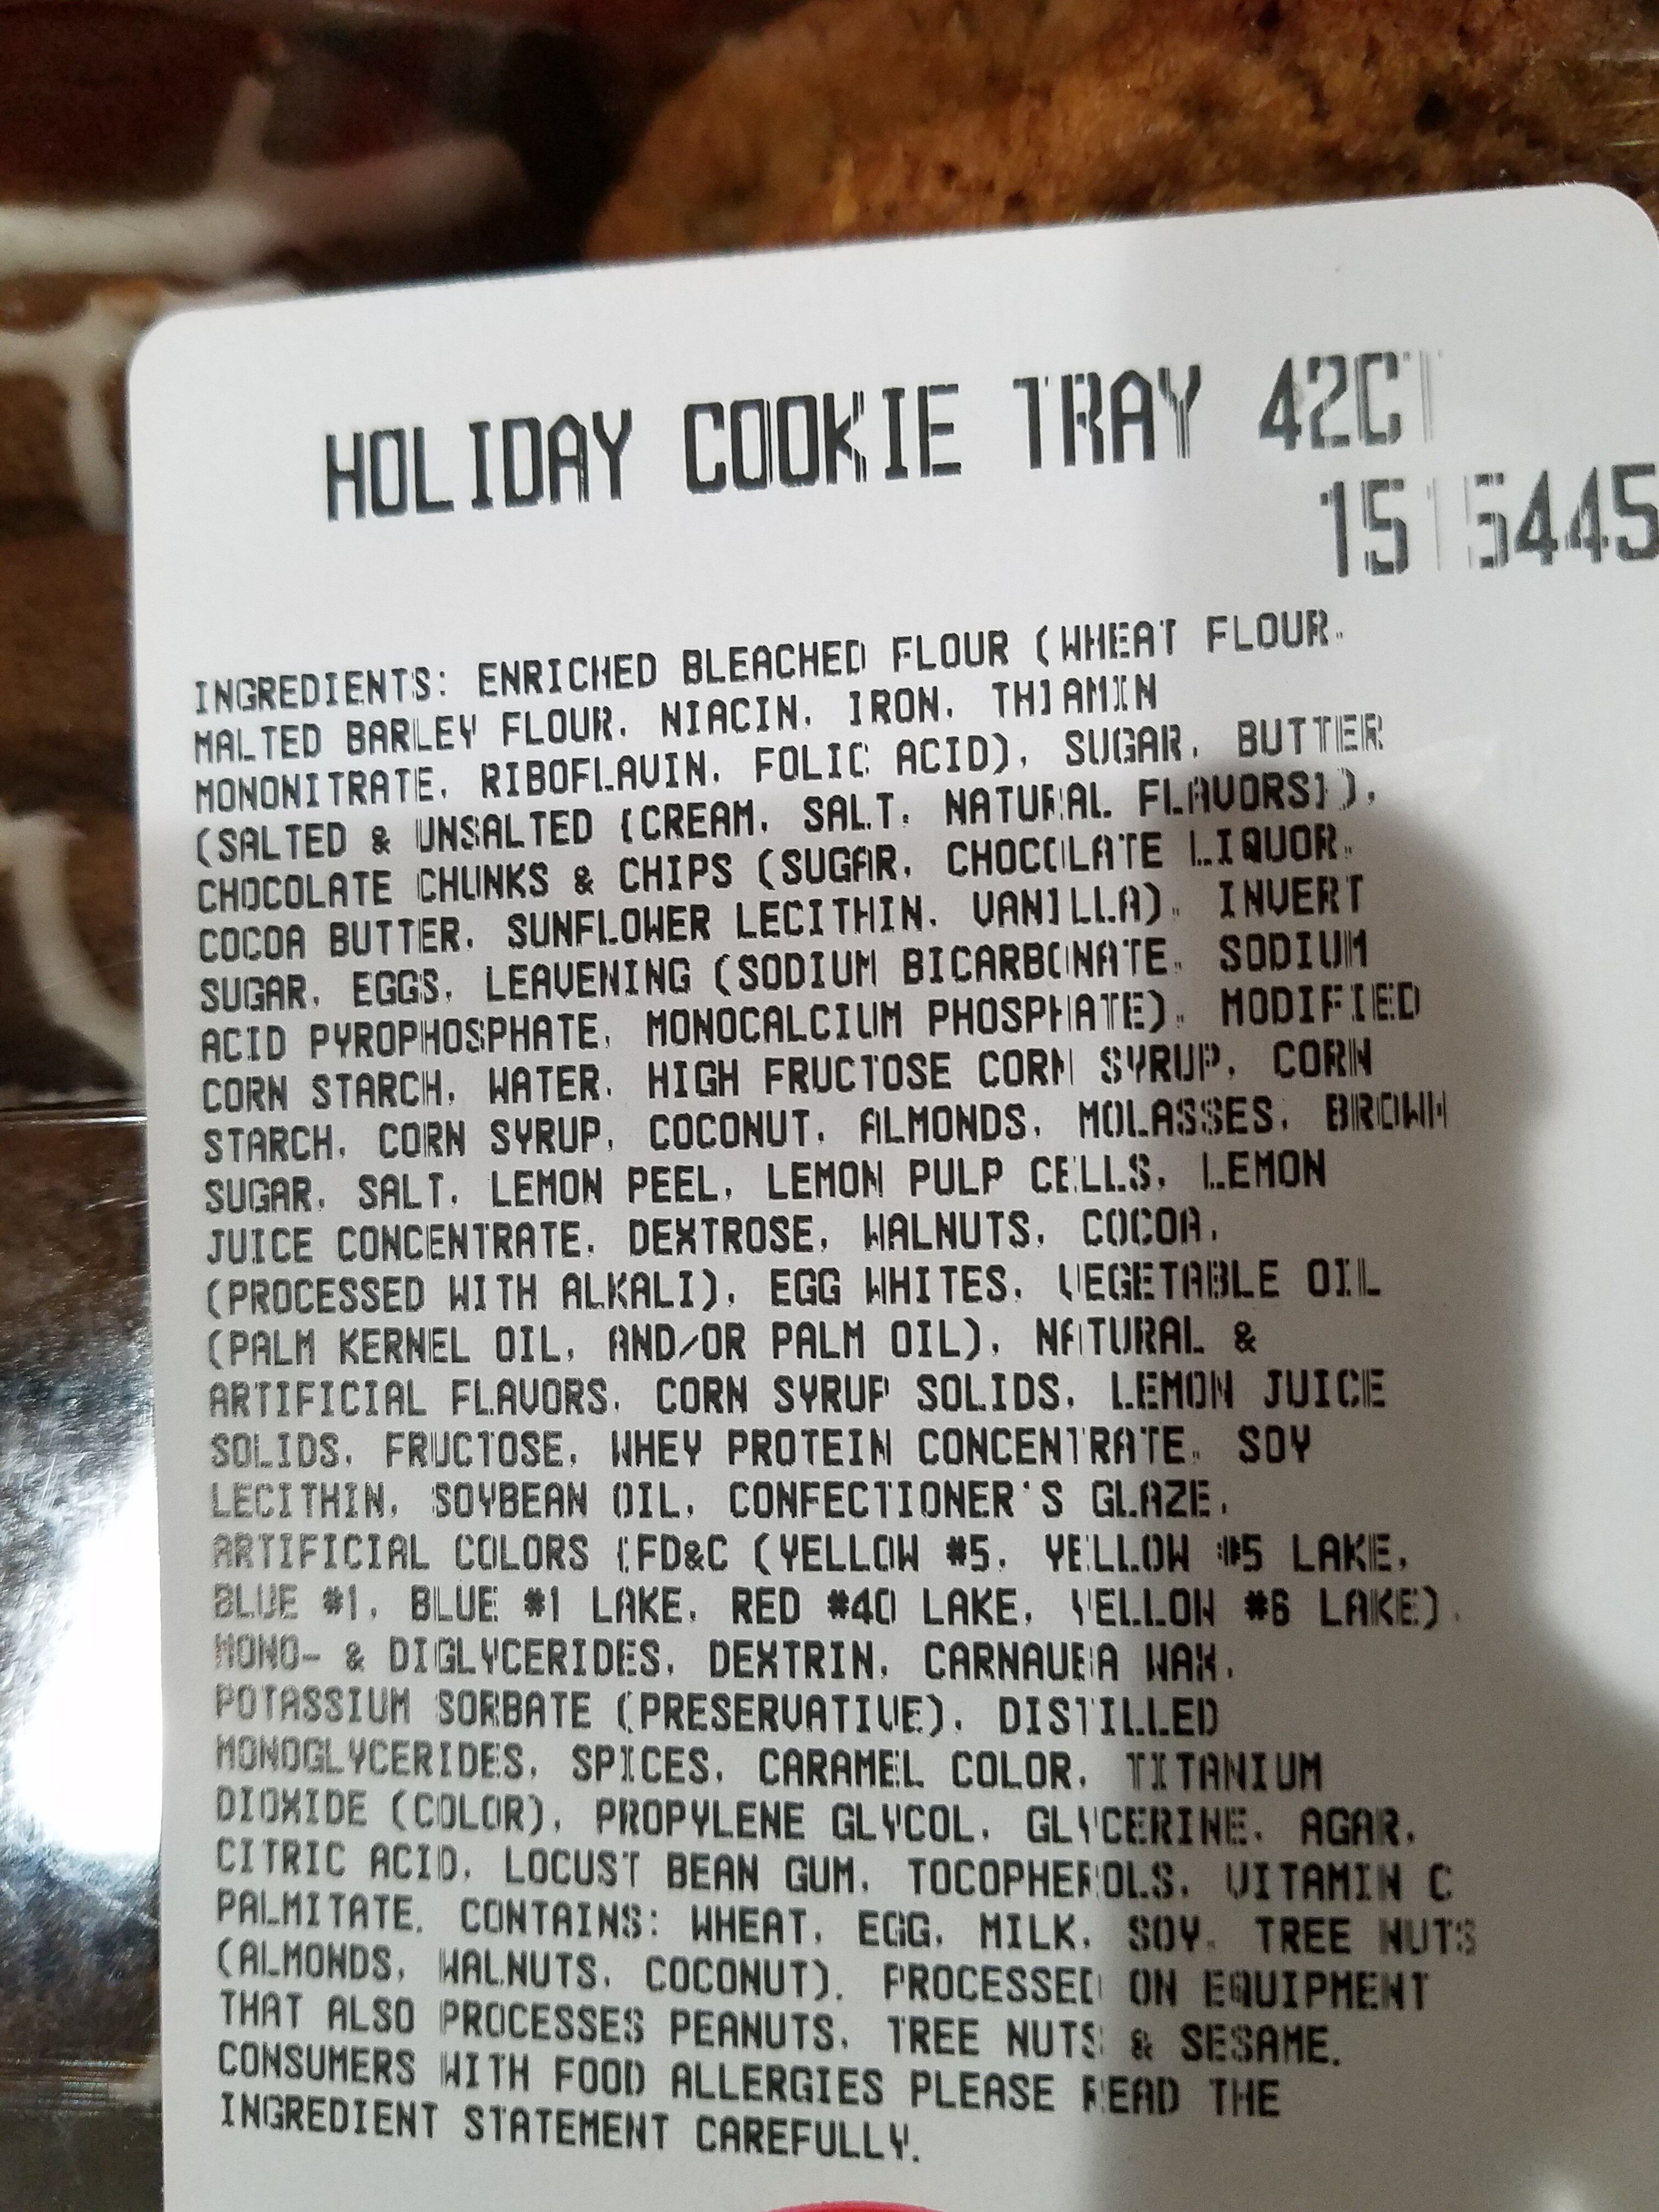 Holday cookies from Costco - Ingredients